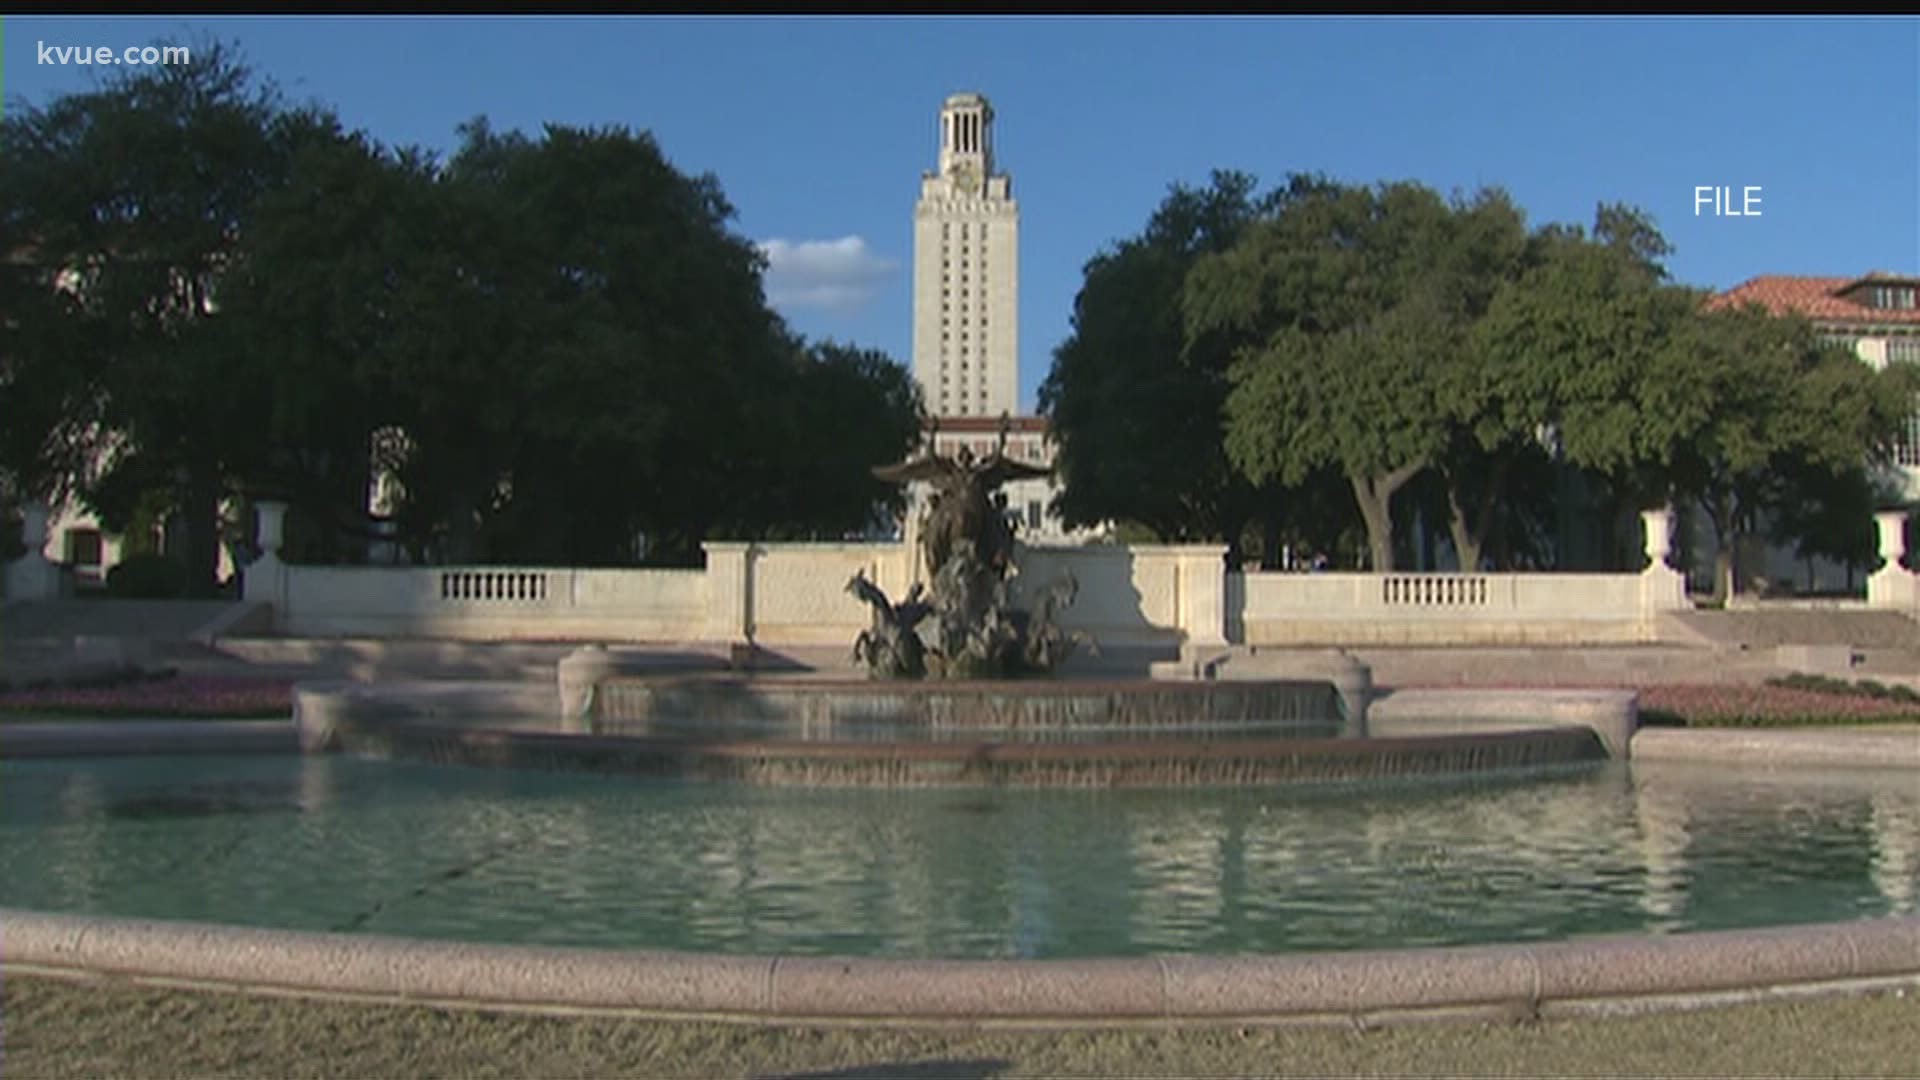 The University of Texas campus will look different this fall. On Tuesday, UT leaders laid out plans for classes.